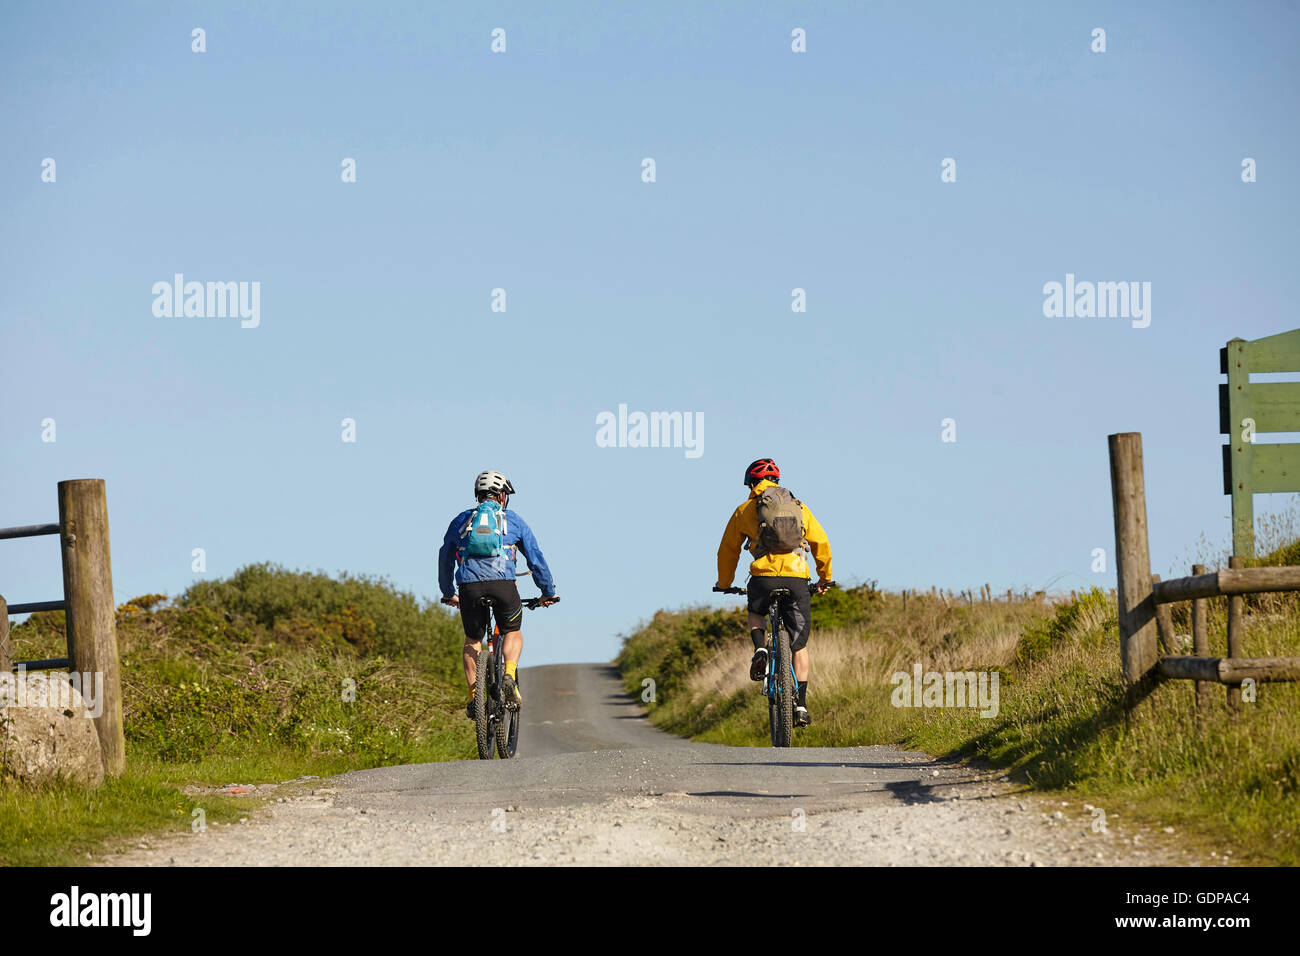 Rear view of cyclists cycling on rural road Stock Photo